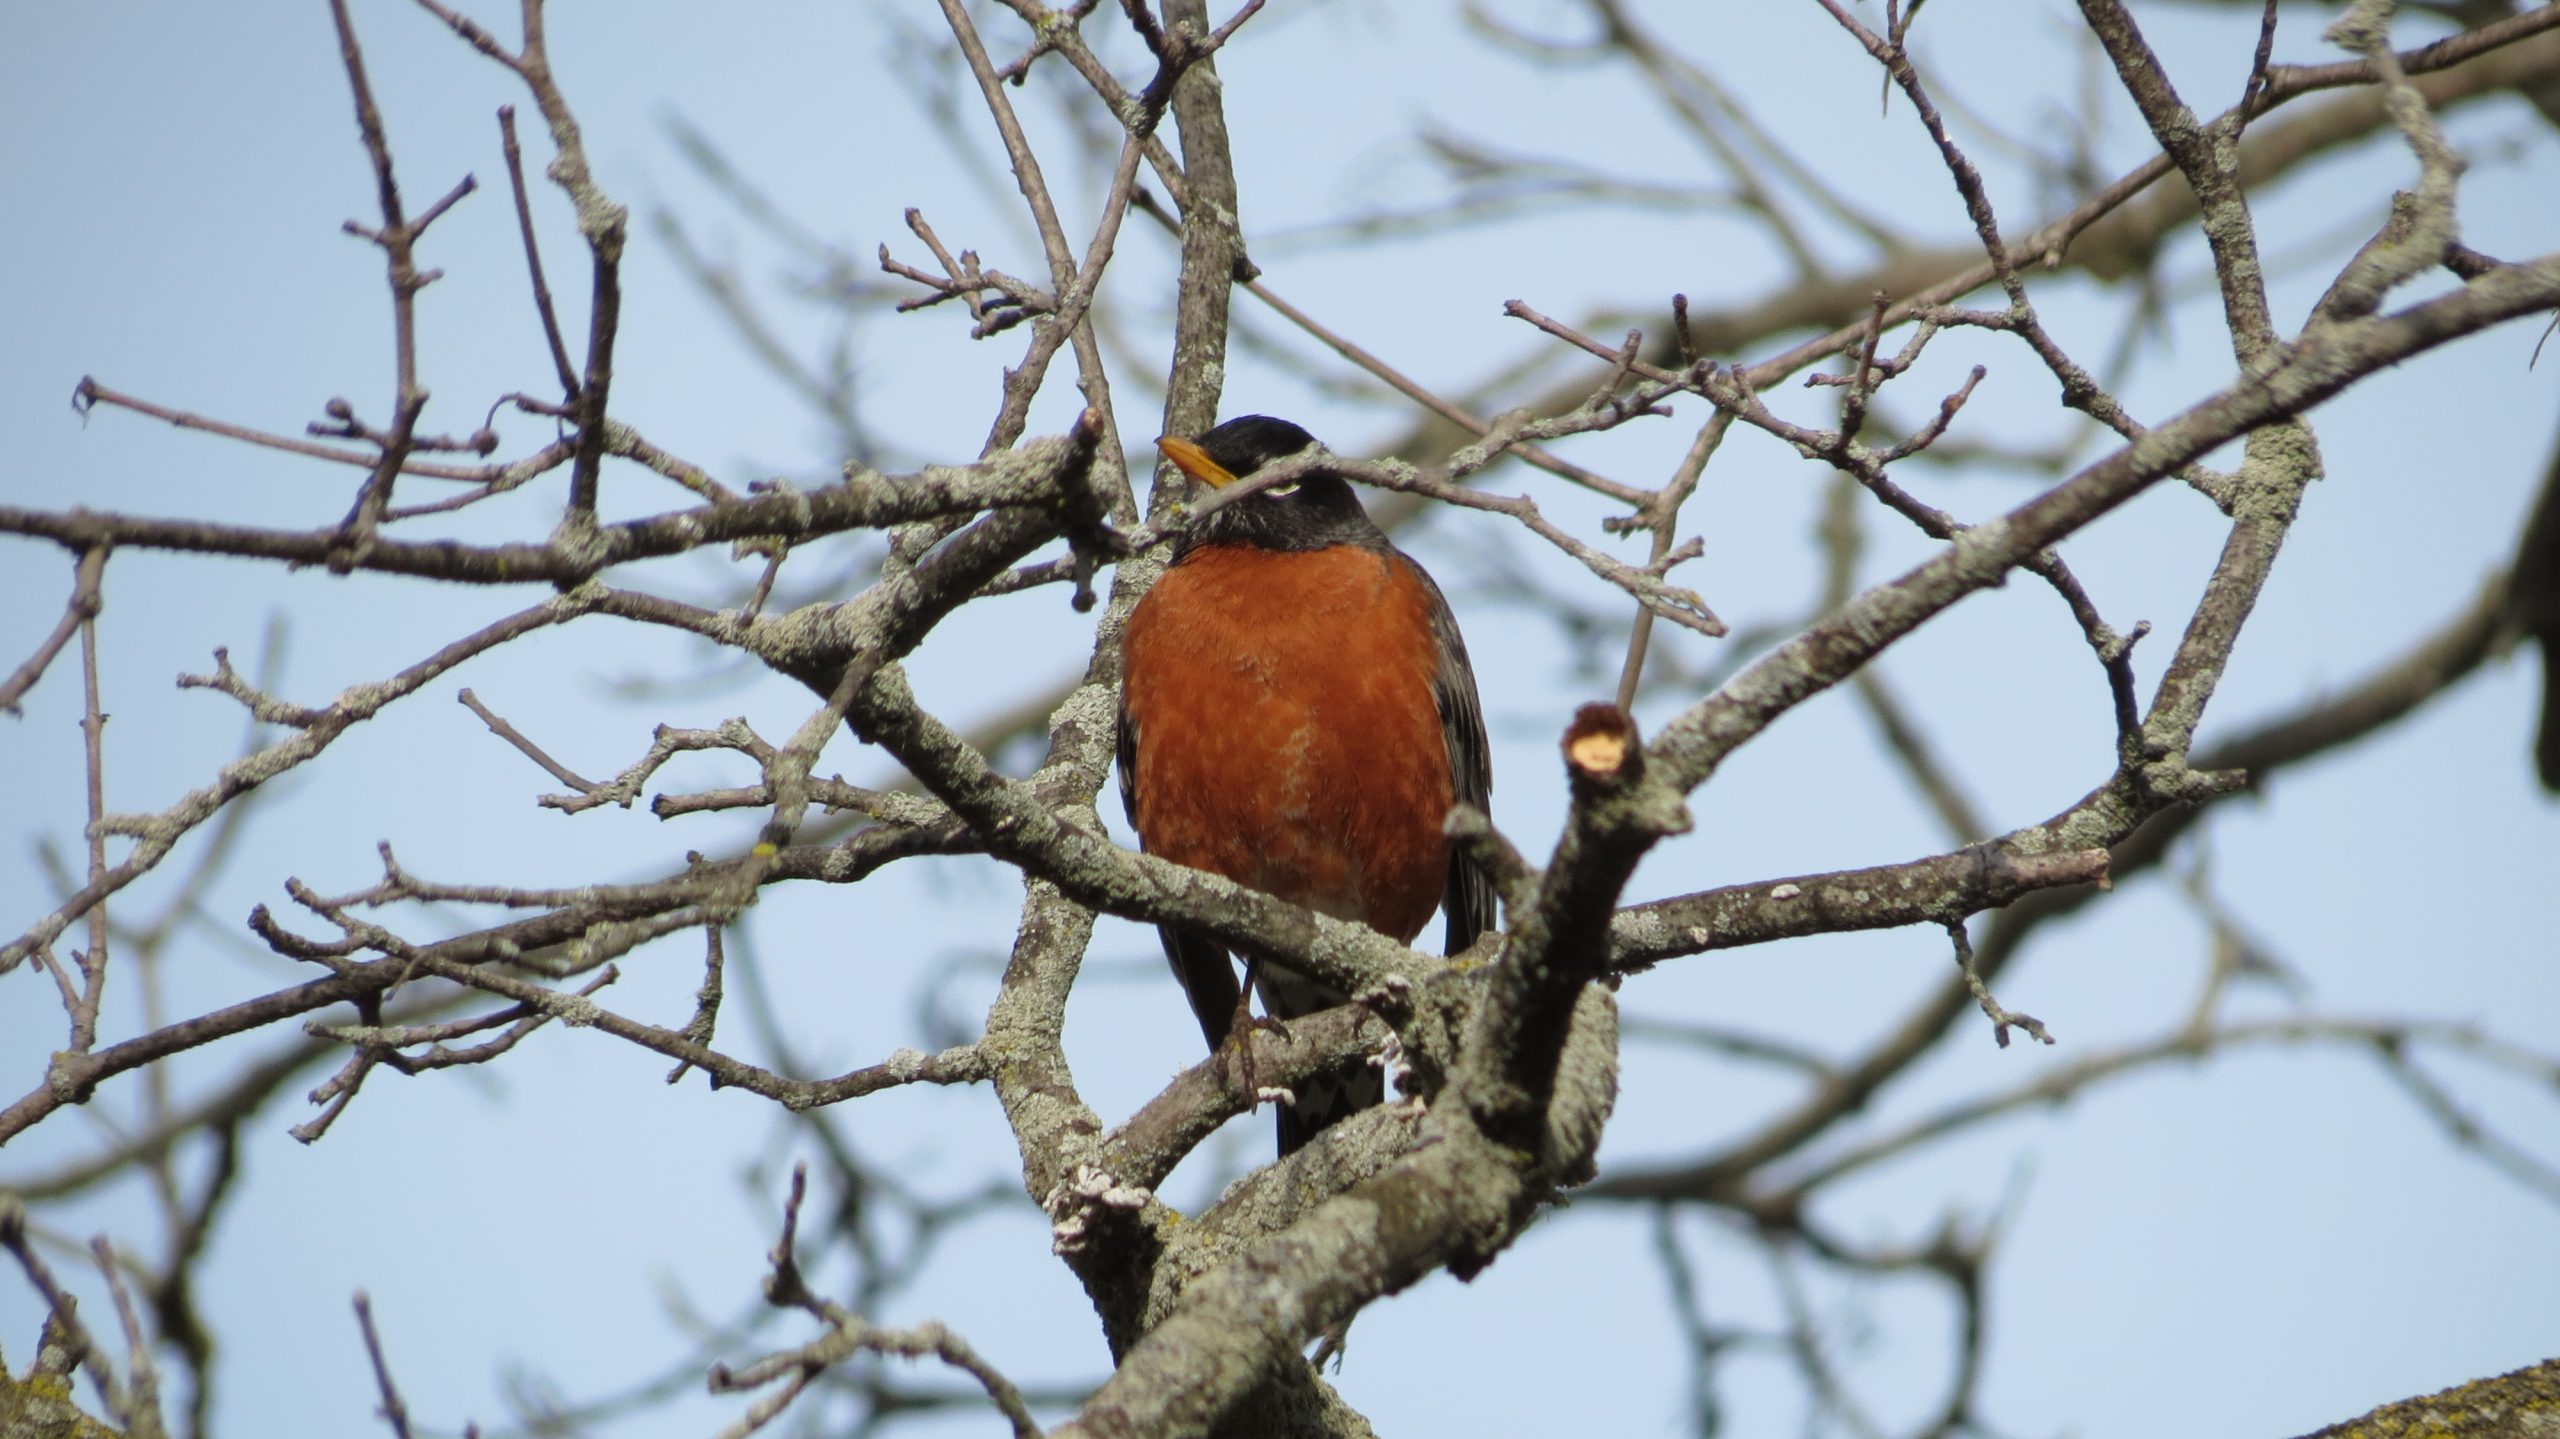 An American robin with a bold red chest and black plumage in a tree at Taylor Creek Park.